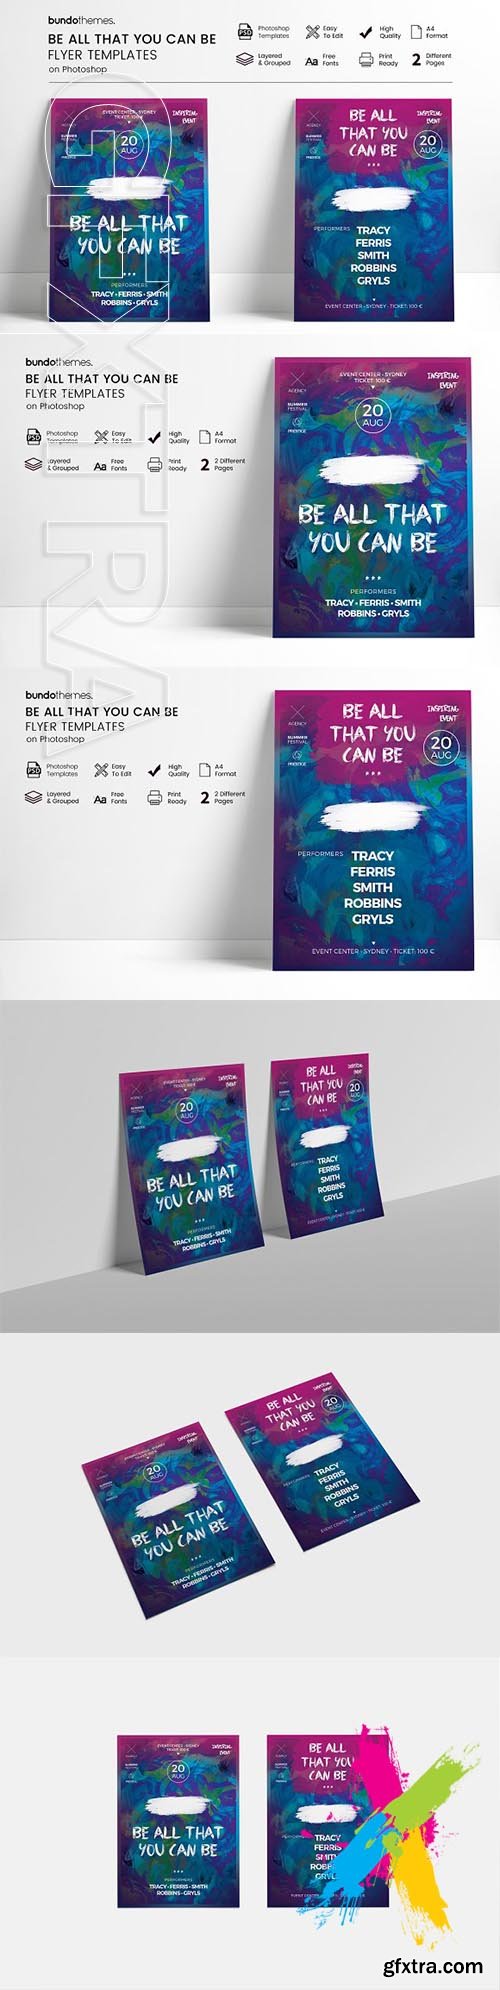 CreativeMarket - Be All That You Can Be Flyer 2033544